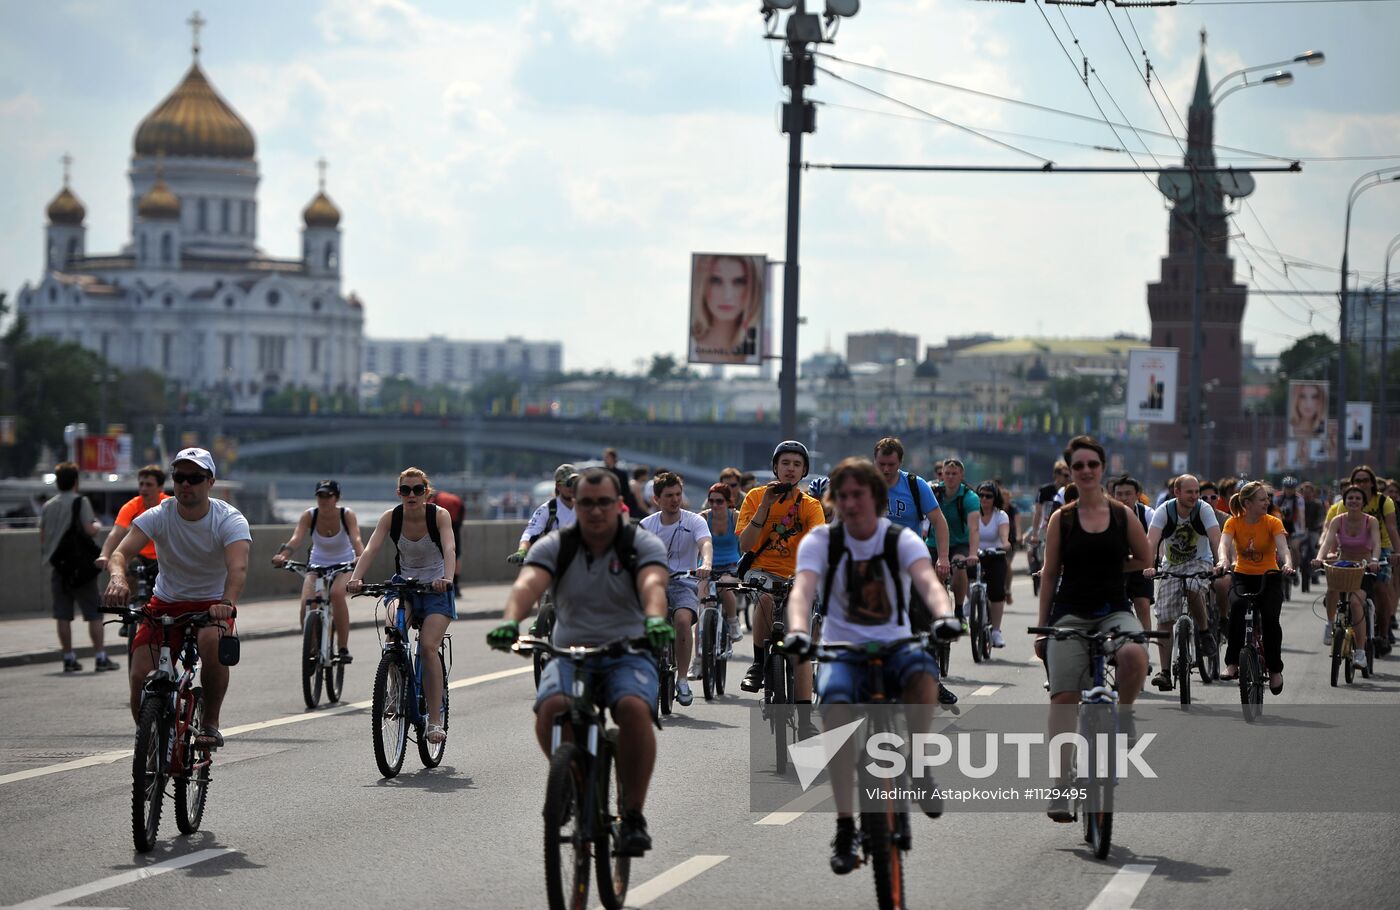 Let’s Bike bicycle parade in Moscow